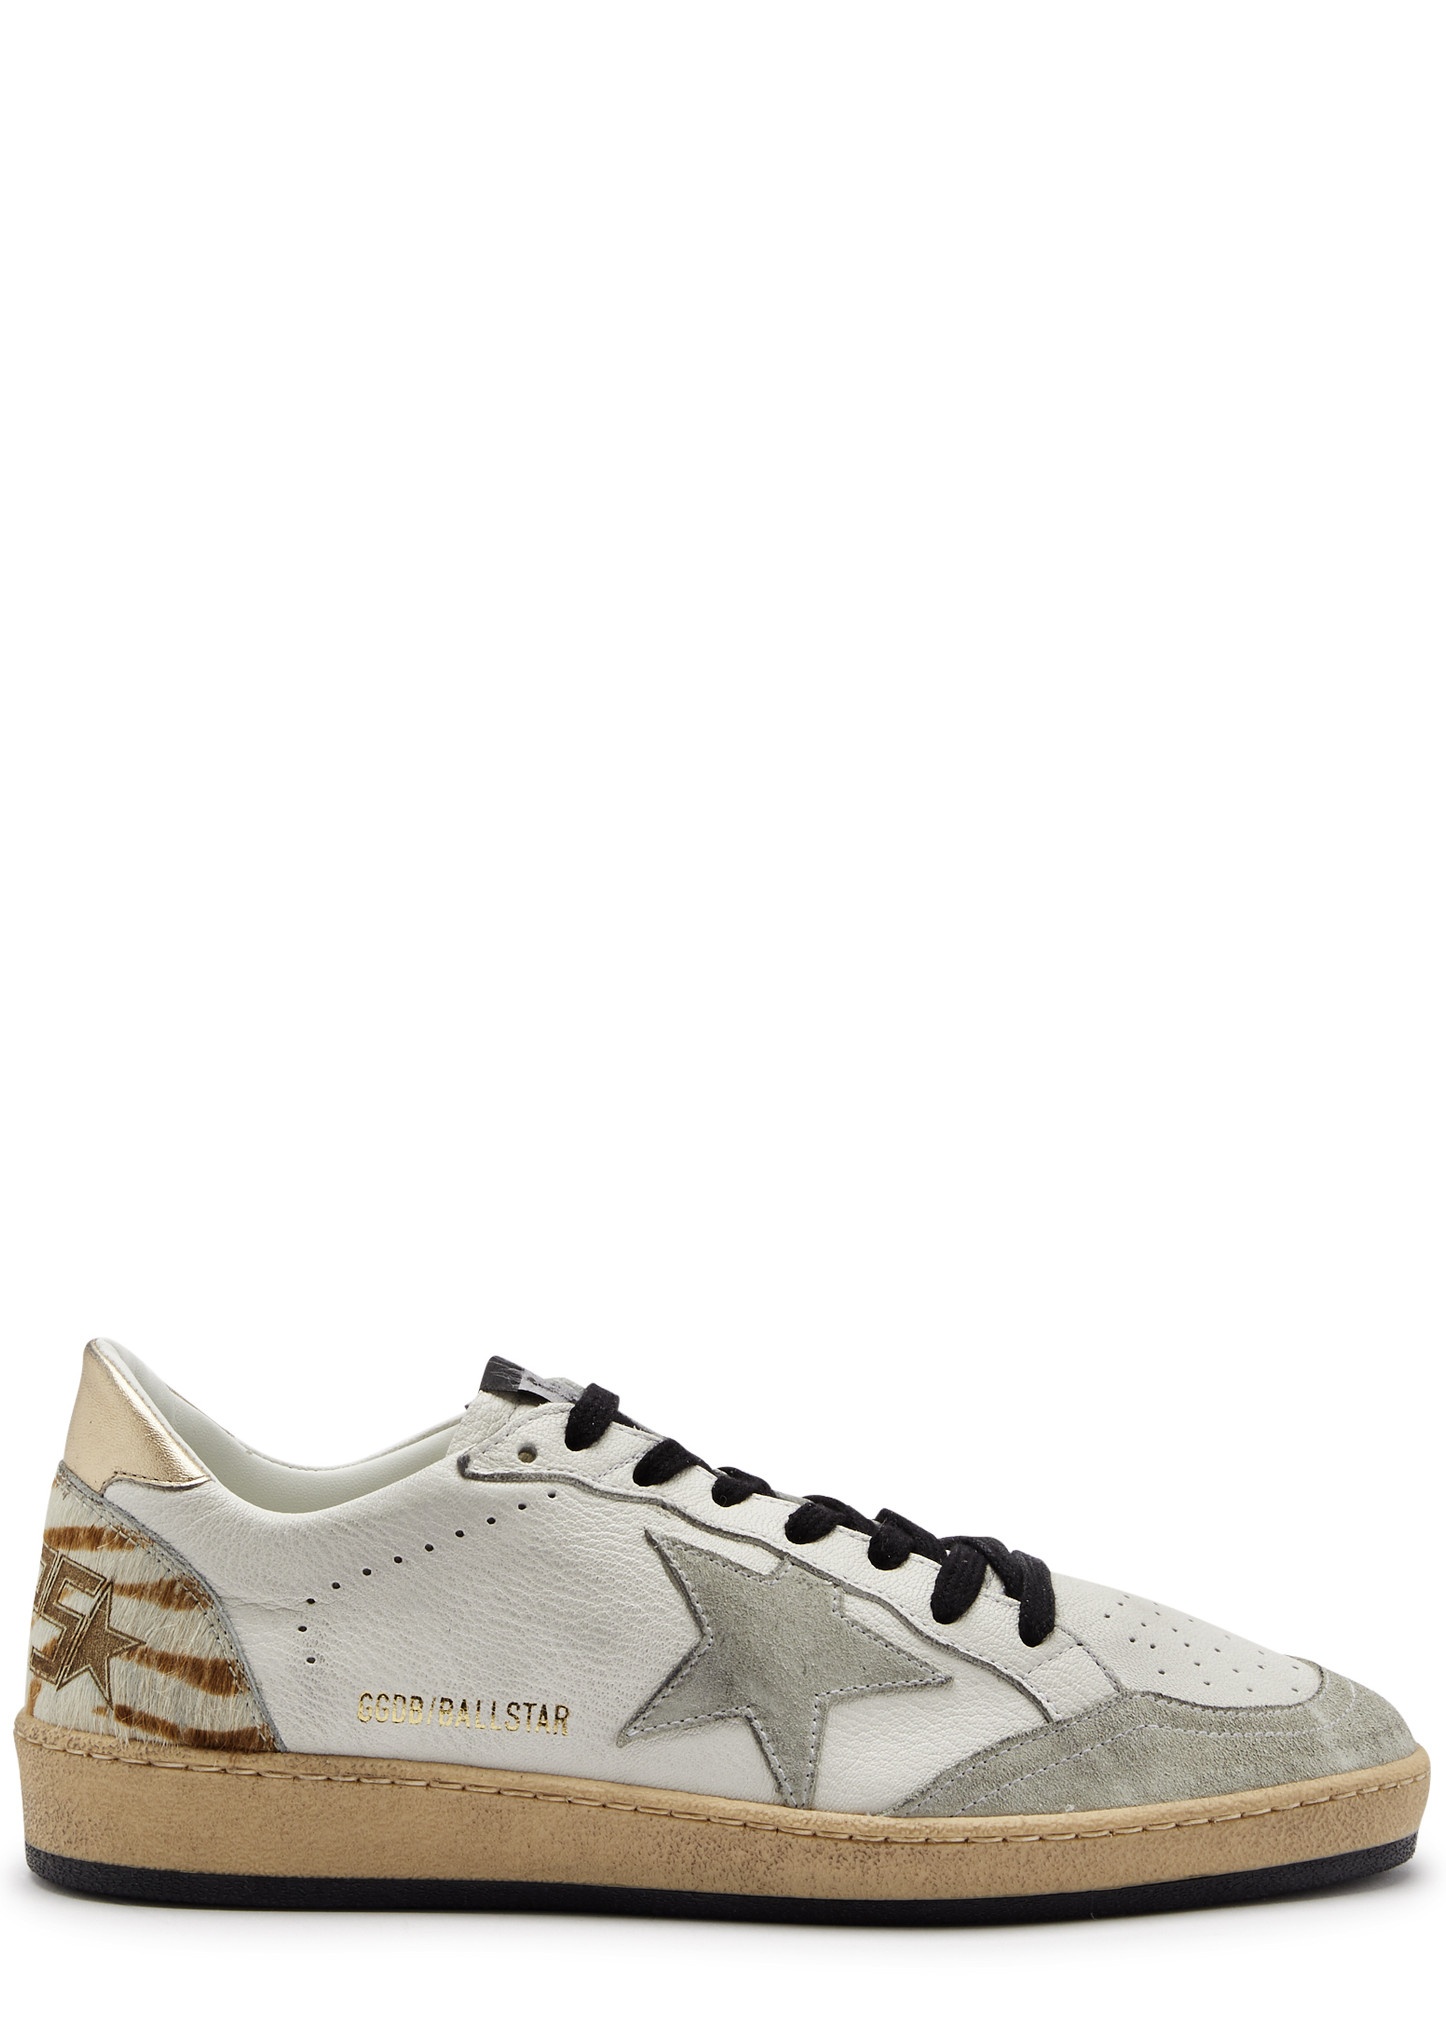 Ball Star distressed leather sneakers - 1